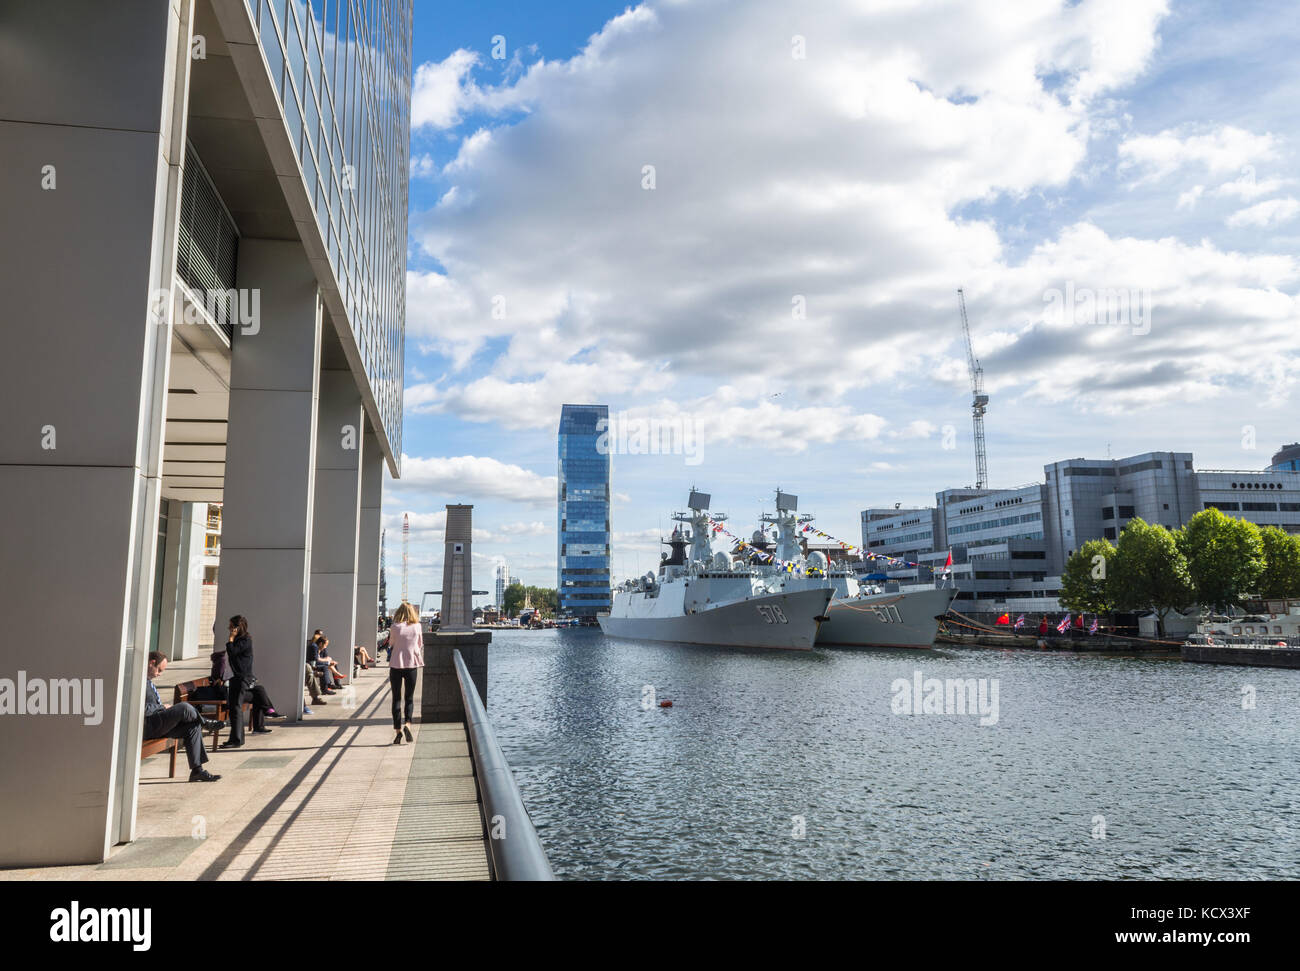 Office workers at lunch as two Chinese warships, the Huanggang and the Yangzhou, anchor in the West India Docks on a goodwill tour Stock Photo